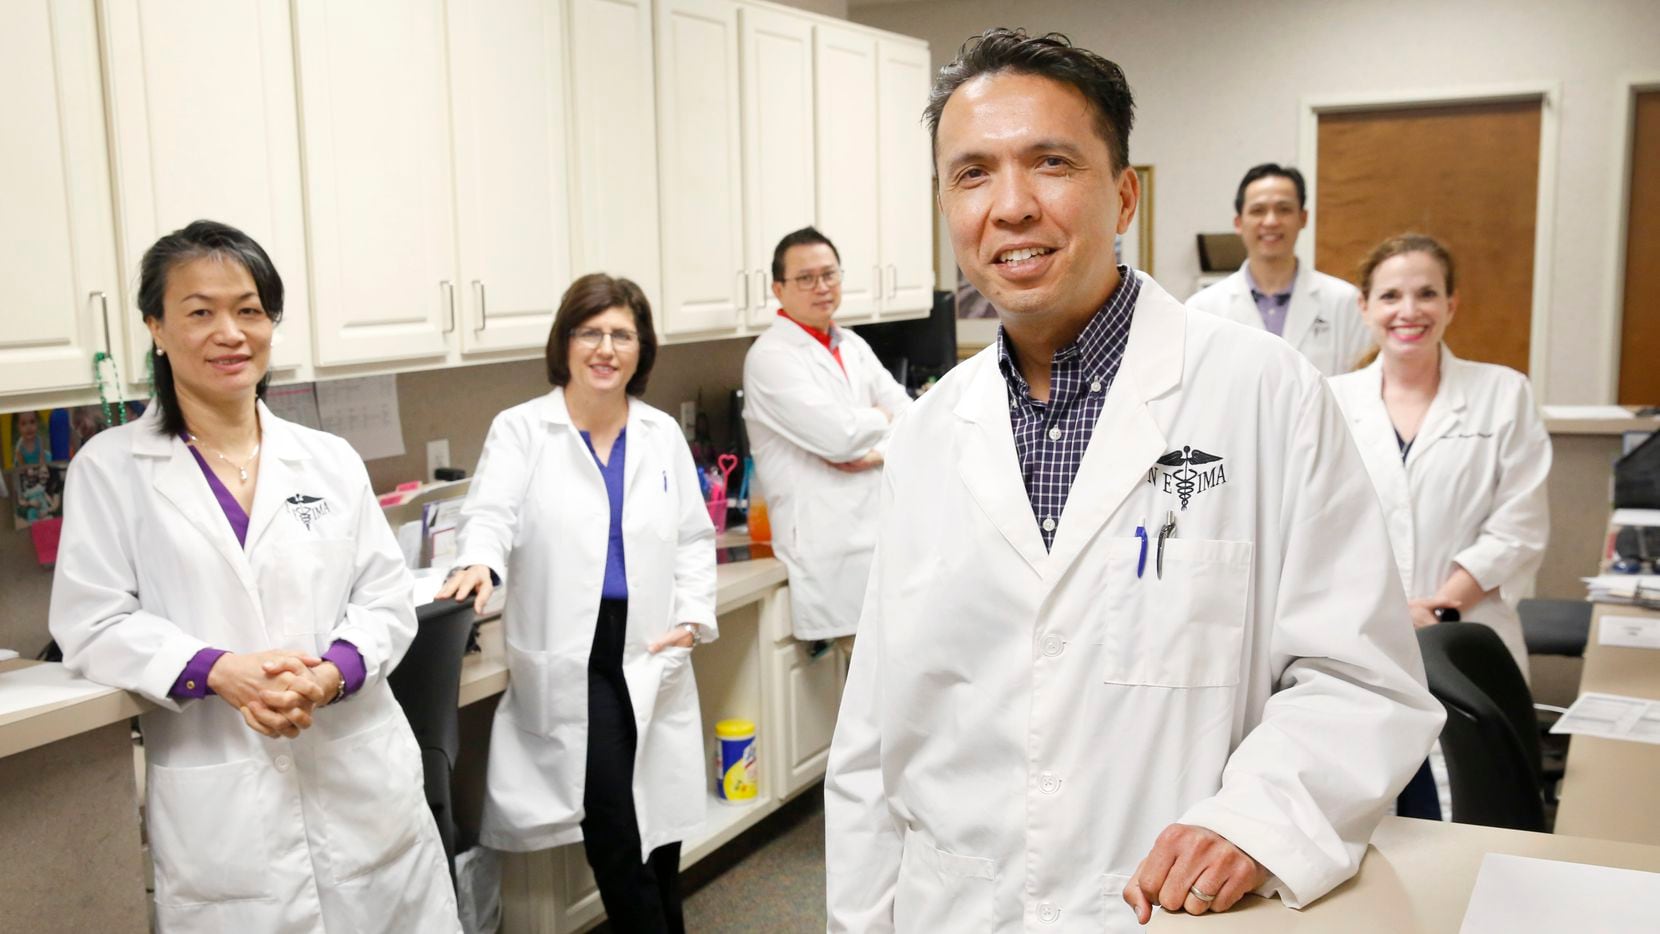 Dr. Stephen Buksh (foreground), a Euless doctor for 21 years, is pictured with fellow...